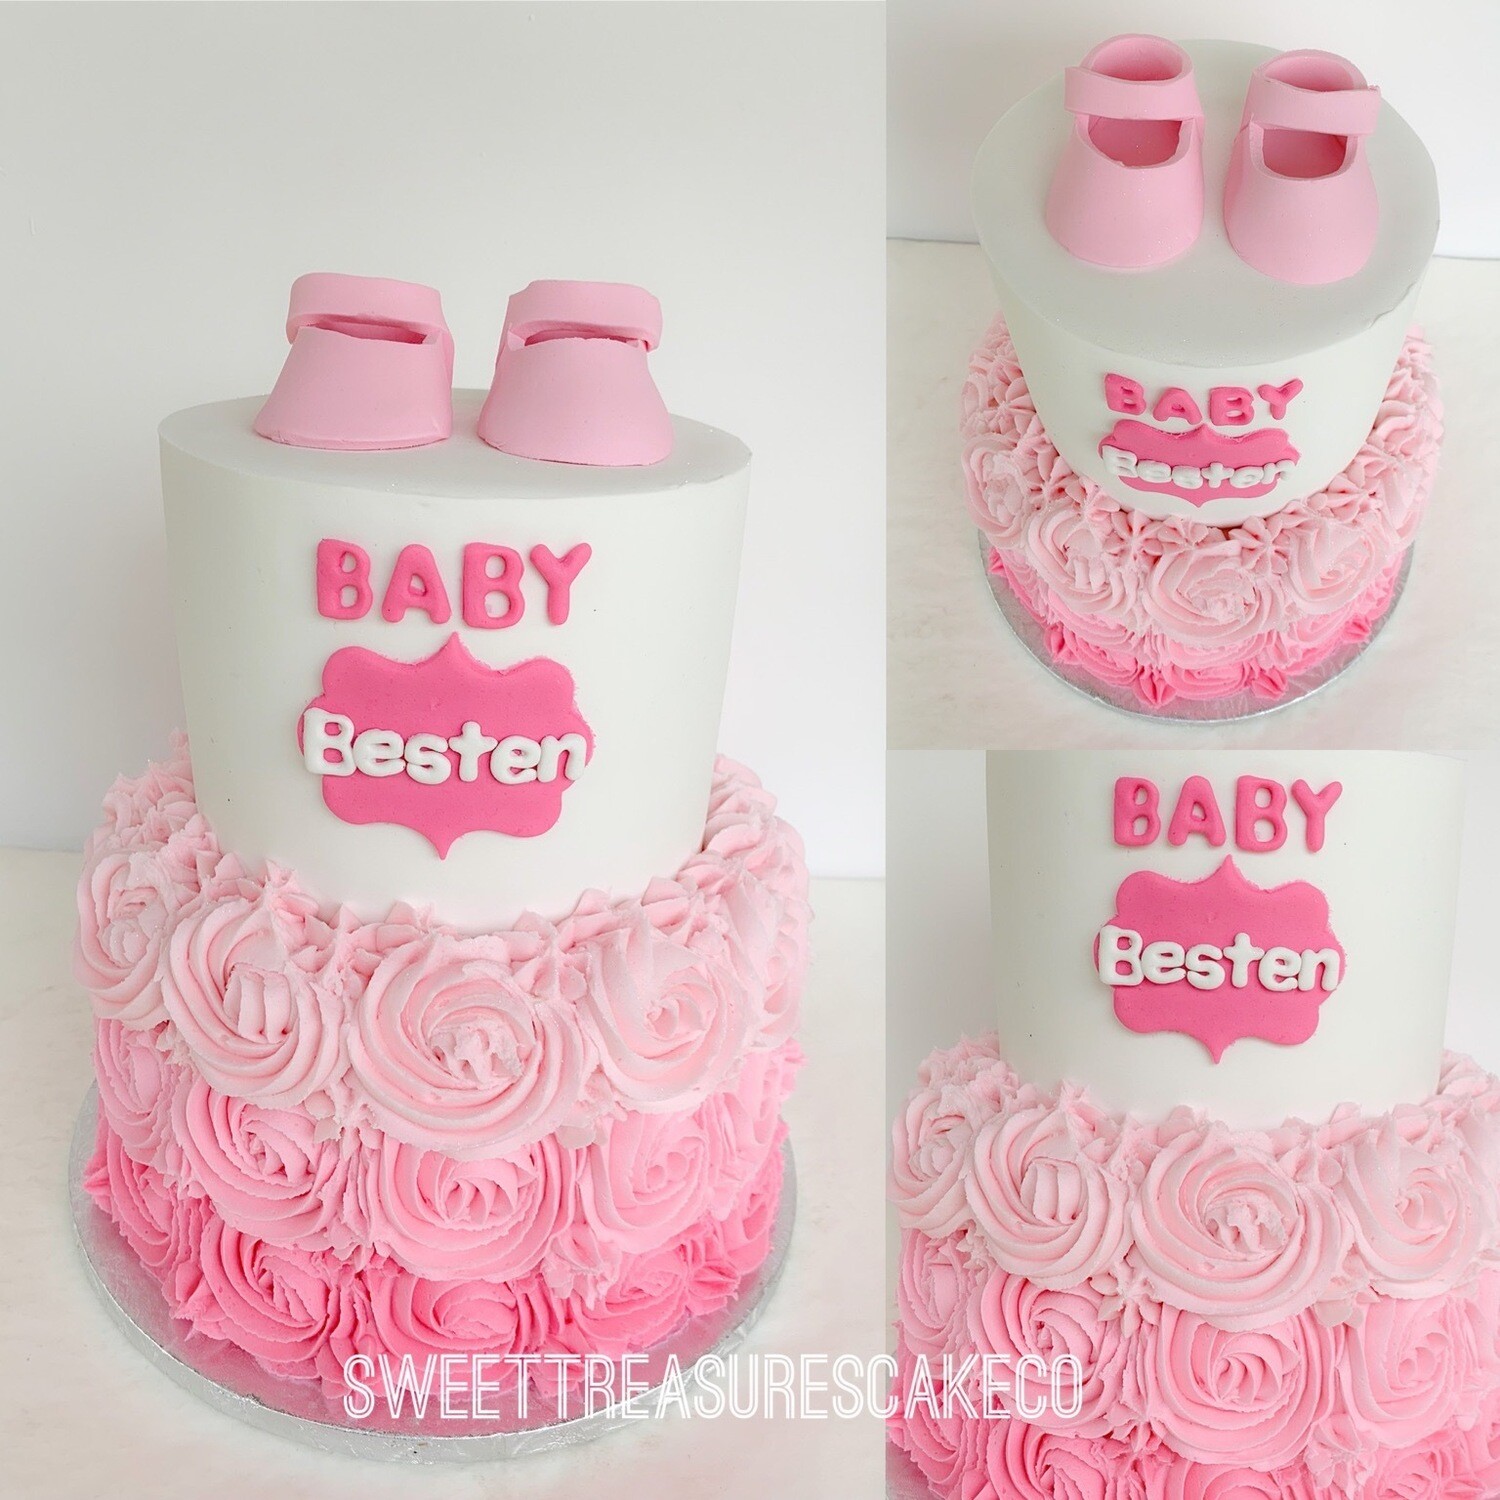 Pink and White babyshower 2 tier cake